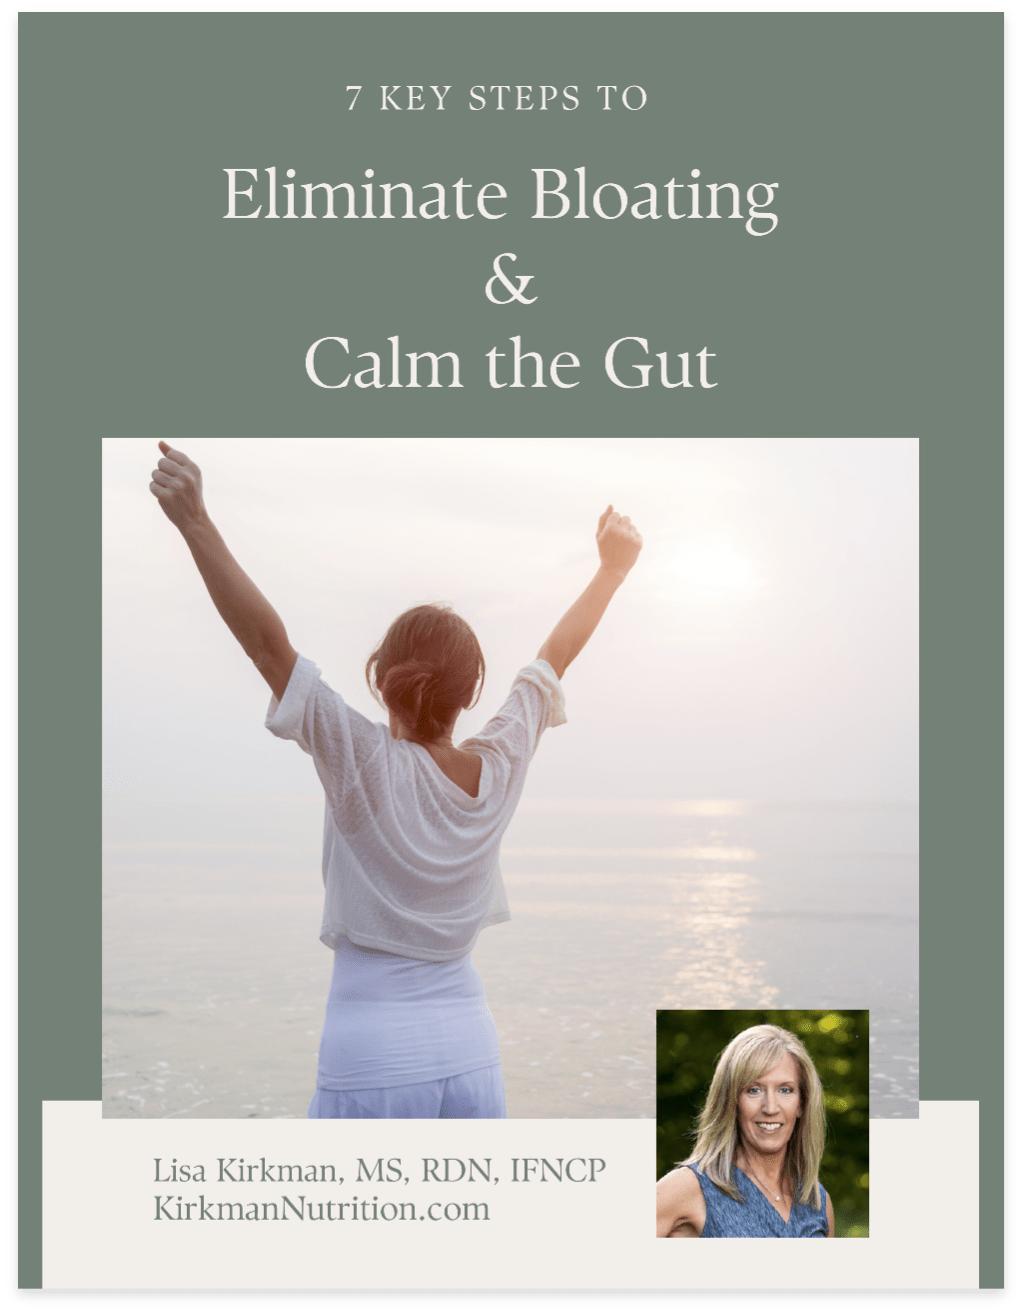 7 Key Steps to Eliminate Bloating & Calm the Gut